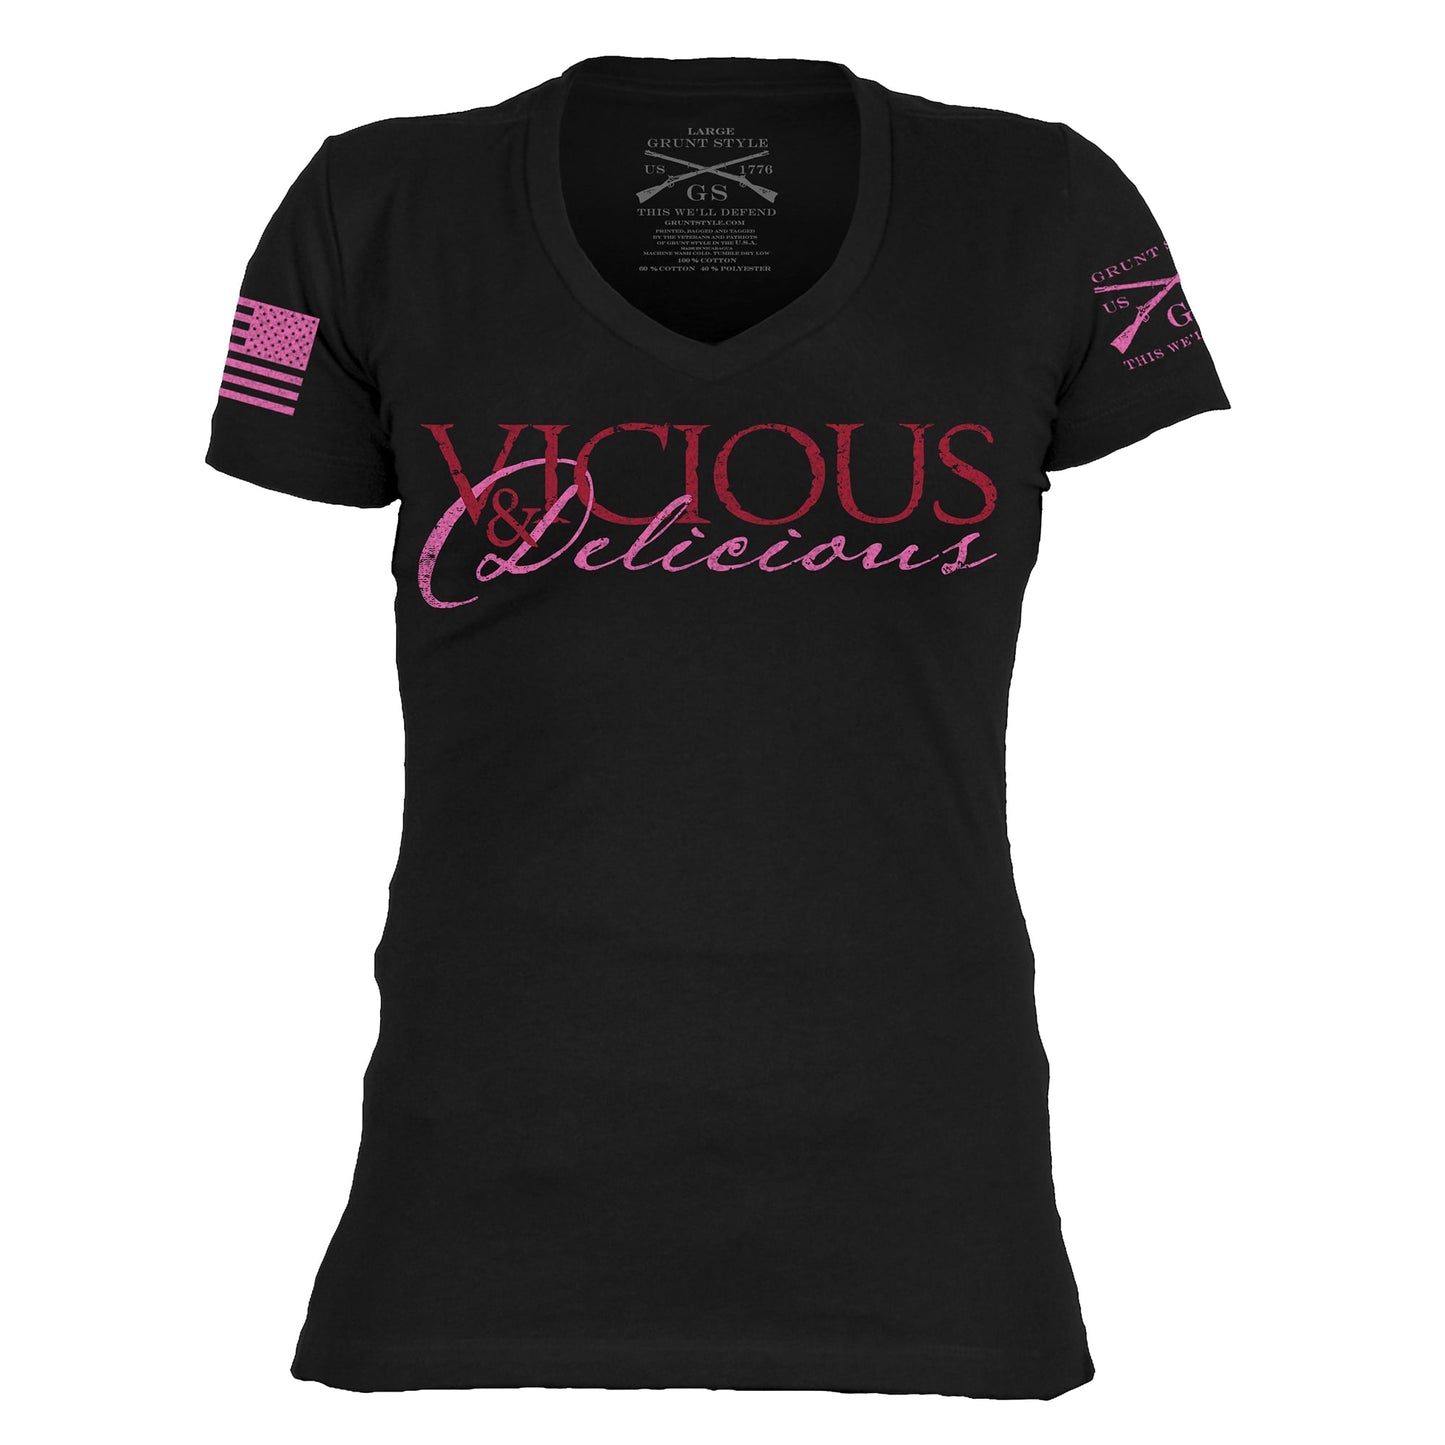 Vicious and Delicious Graphic Tee for women  | Grunt Style 